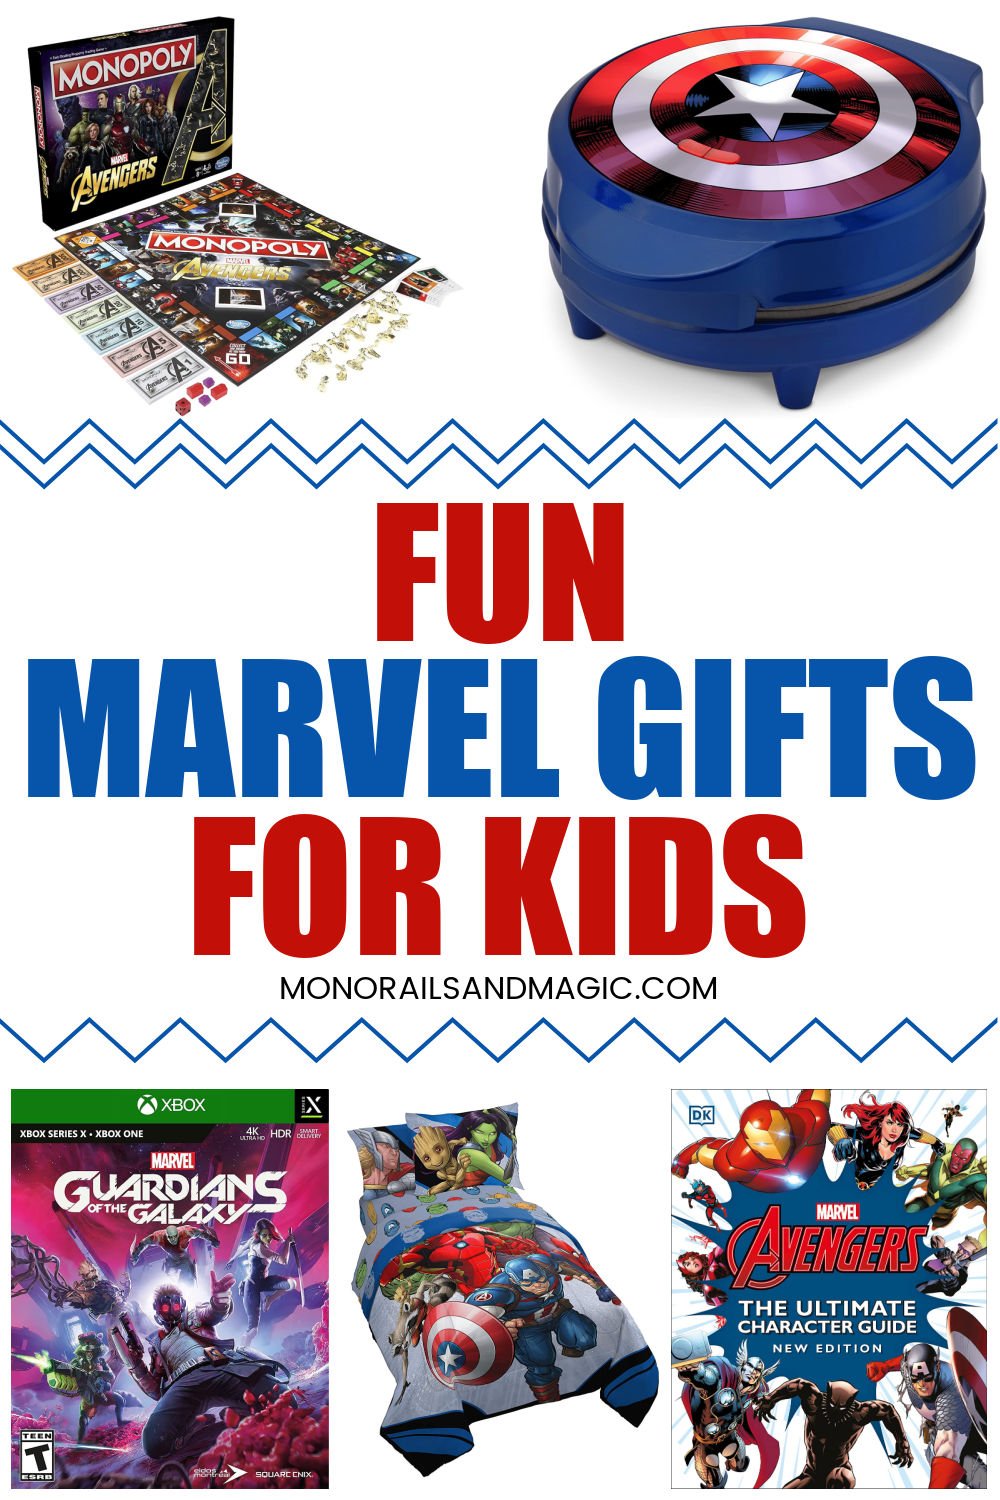 A list of fun Marvel gifs for kids of all ages.